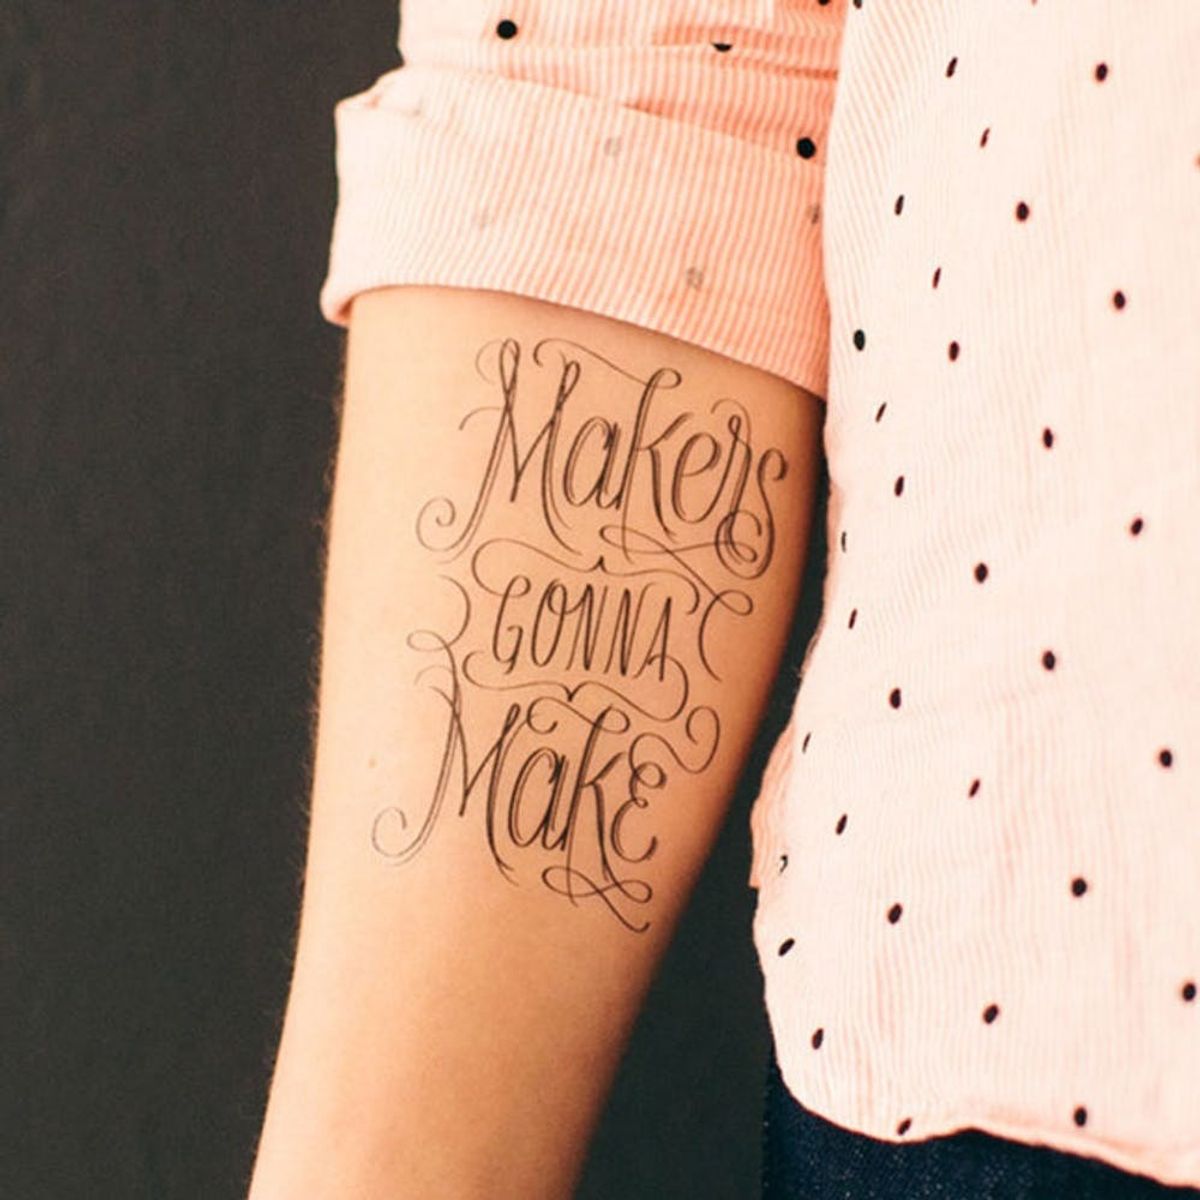 Is This New Cream the Future of Tattoo Removal?